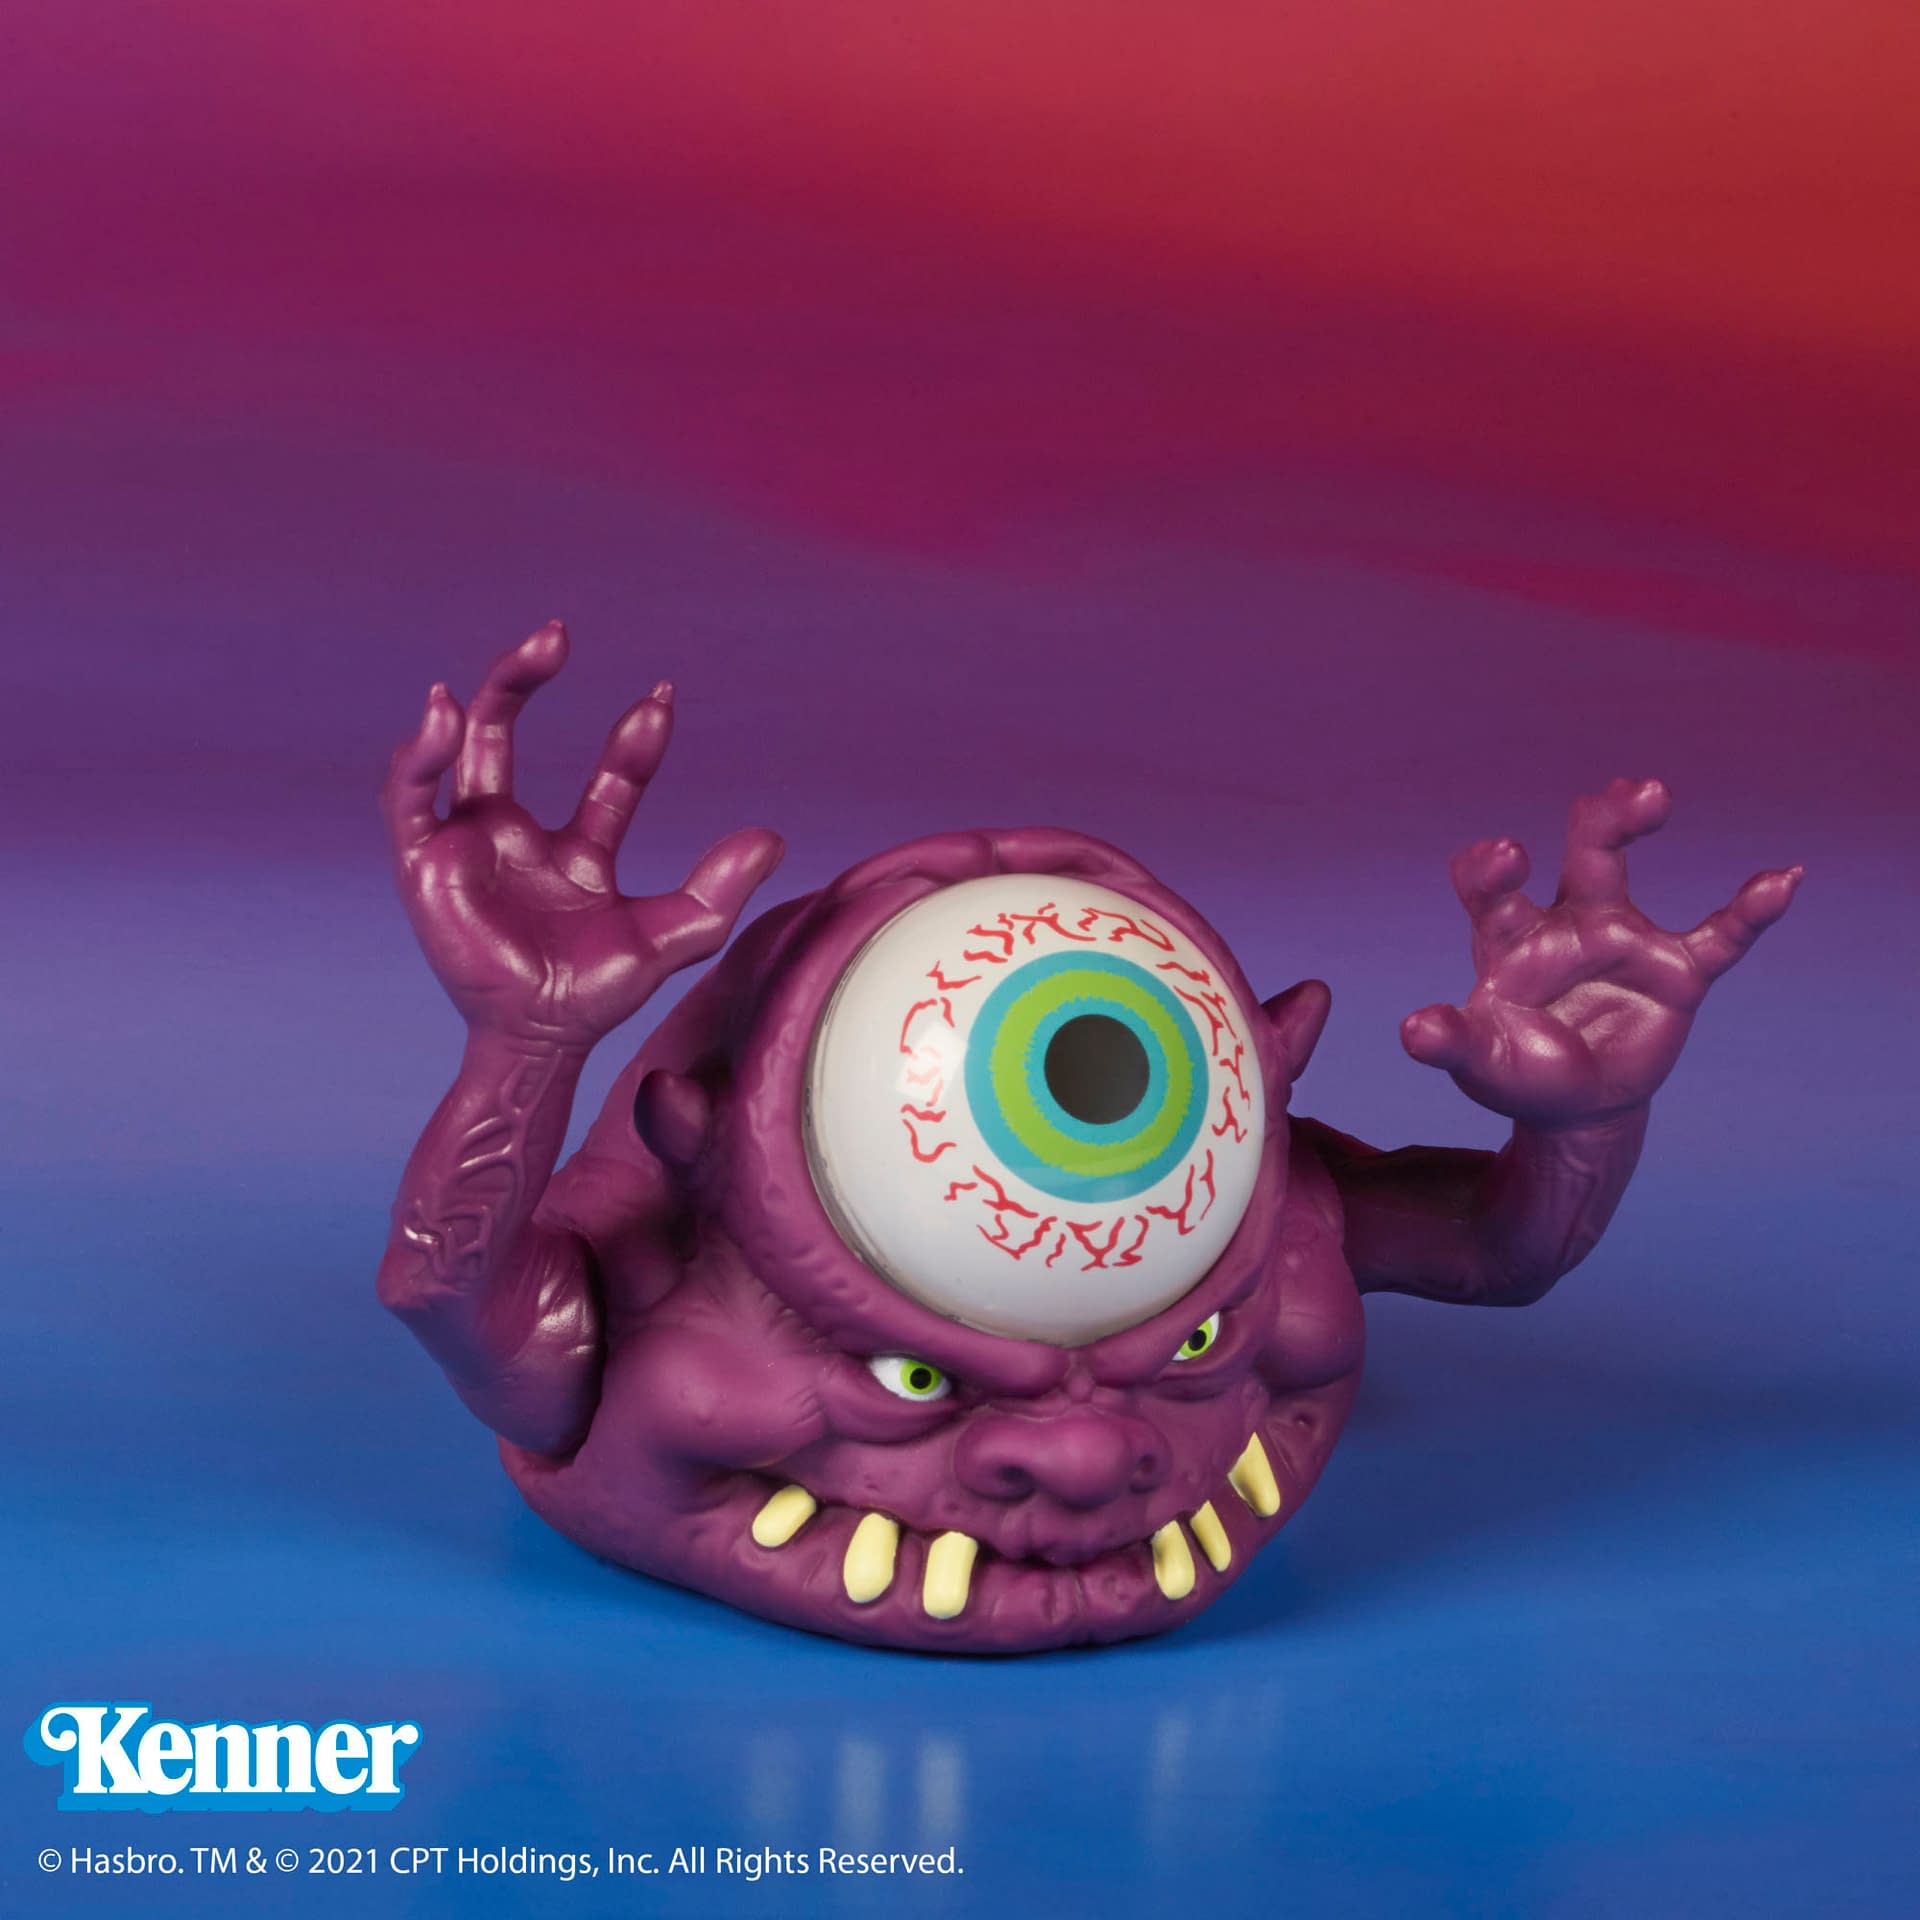 Real Ghostbusters Kenner Classic Ecto-1 Reissue Heading To Walmarts